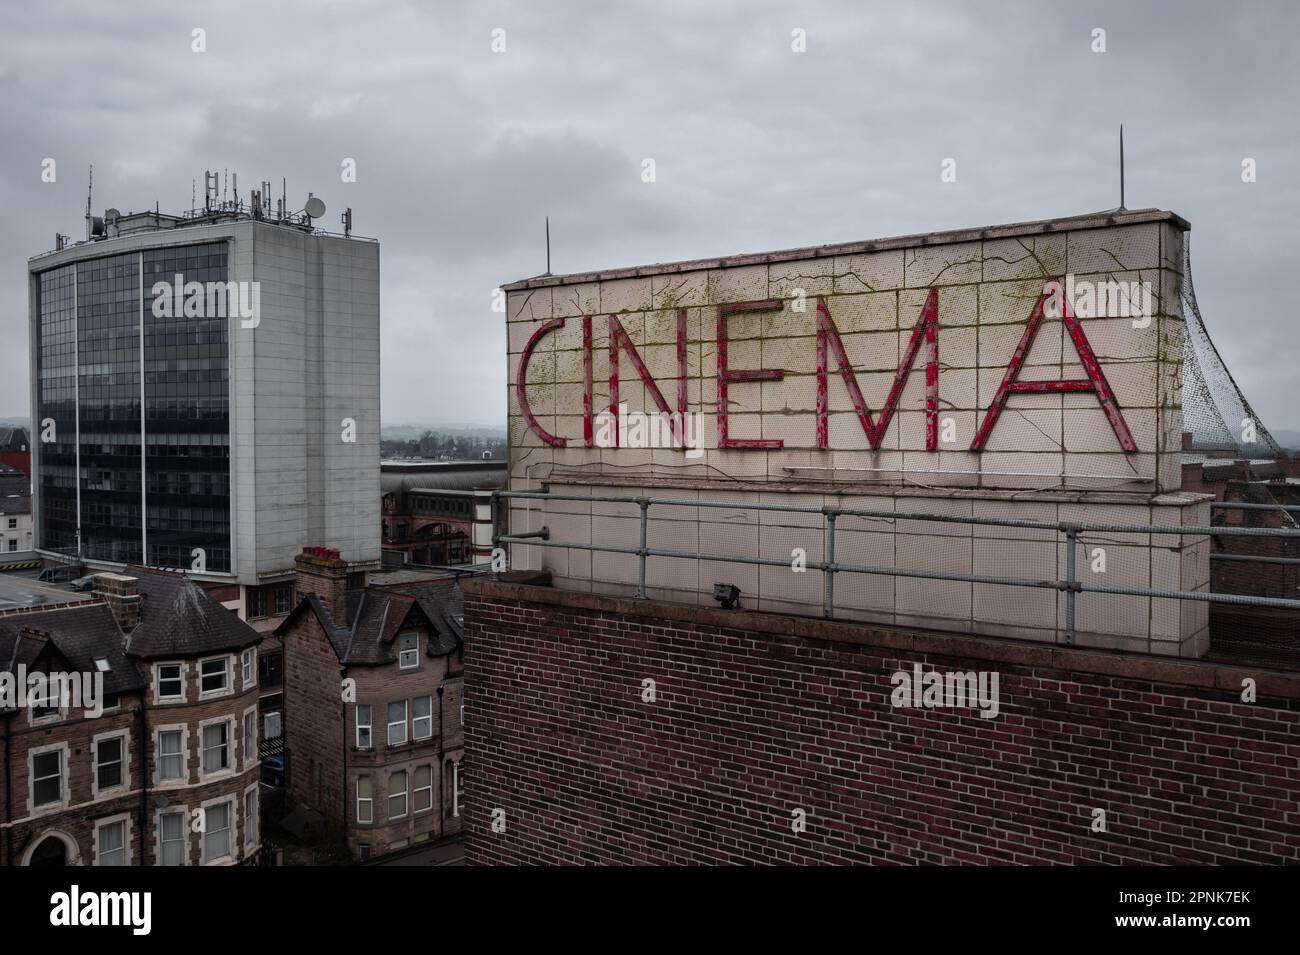 HARROGATE, UK - APRIL 15, 2023. A Cinema sign on the roof of a movie theatre in a retro or art deco style Stock Photo